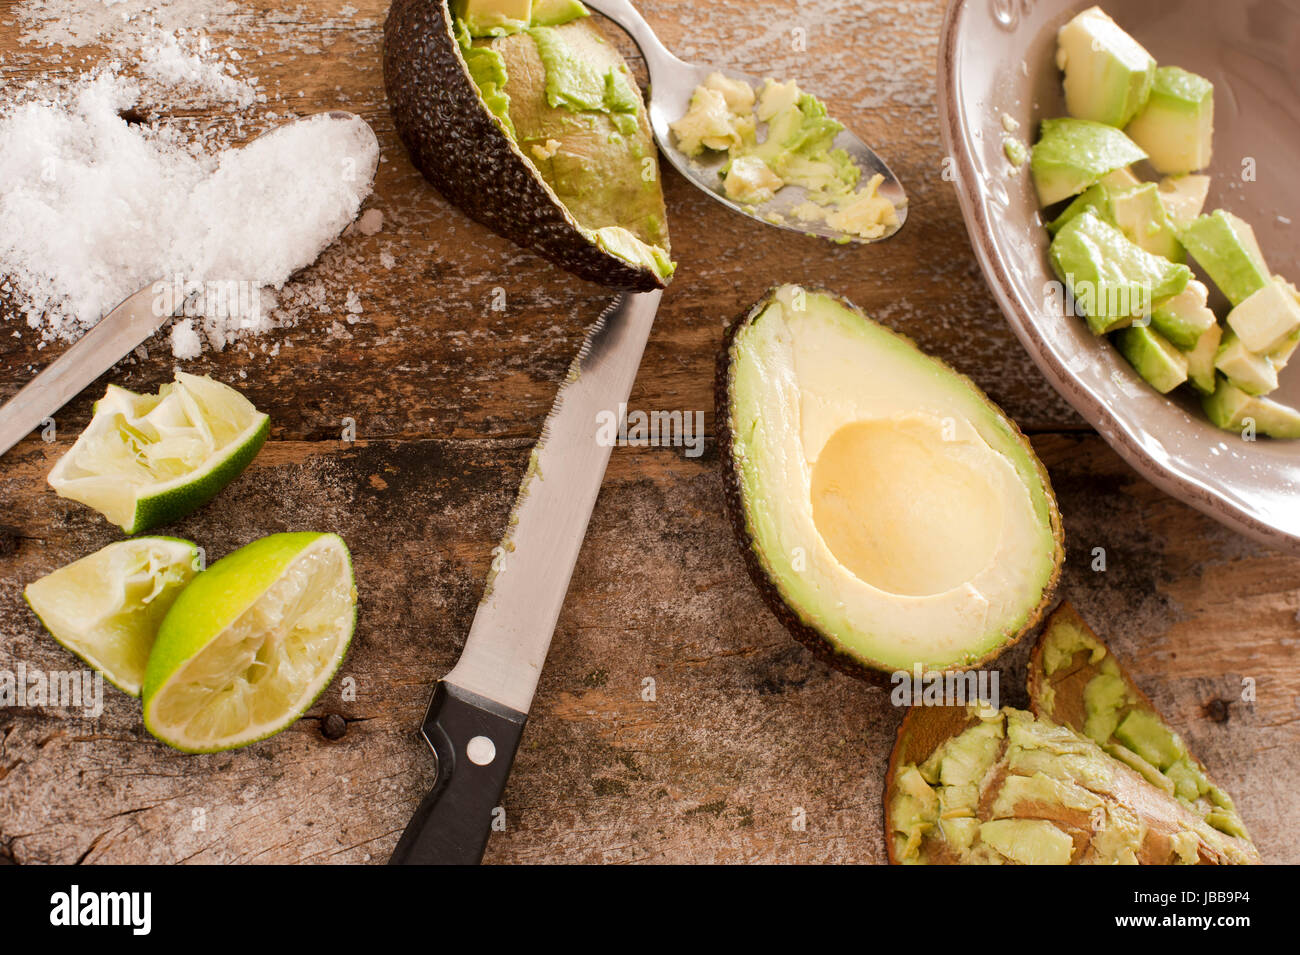 Preparing a delicious fresh avocado salad with a halved avocado next to a bowl with peeled and diced pulp together with a knife, salt and squeezed lemon on an old wooden table, view from above Stock Photo